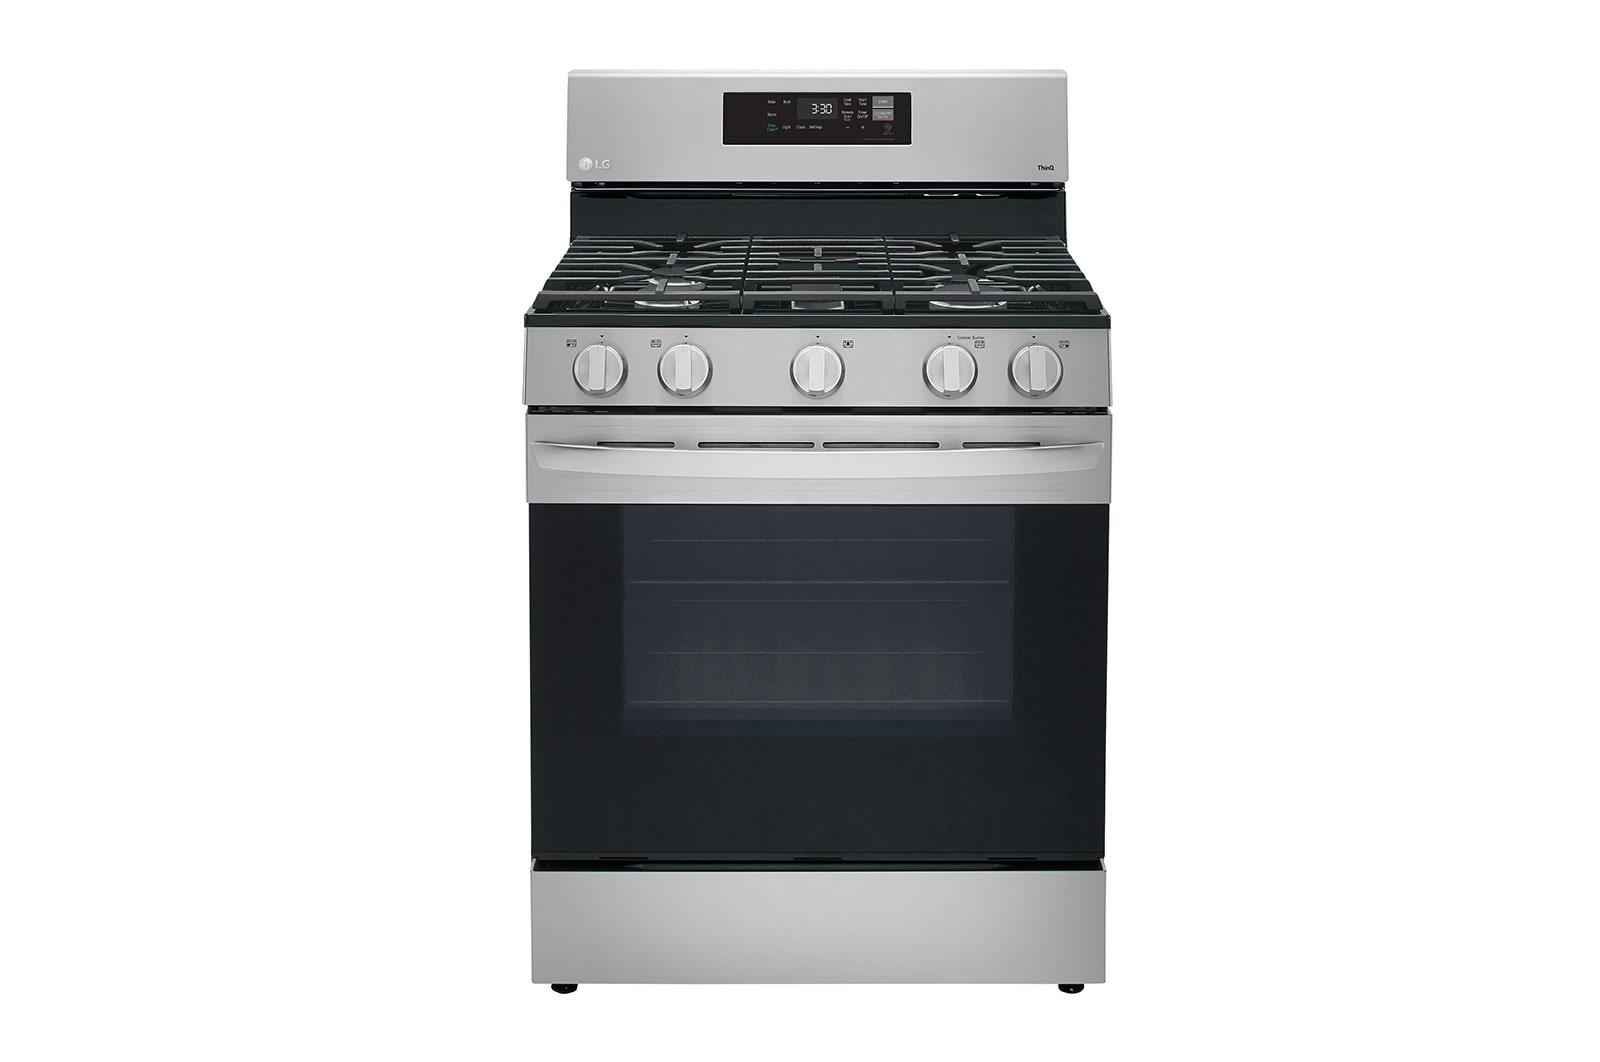 Lg 5.8 cu ft. Smart Wi-Fi Enabled Gas Range with EasyClean®